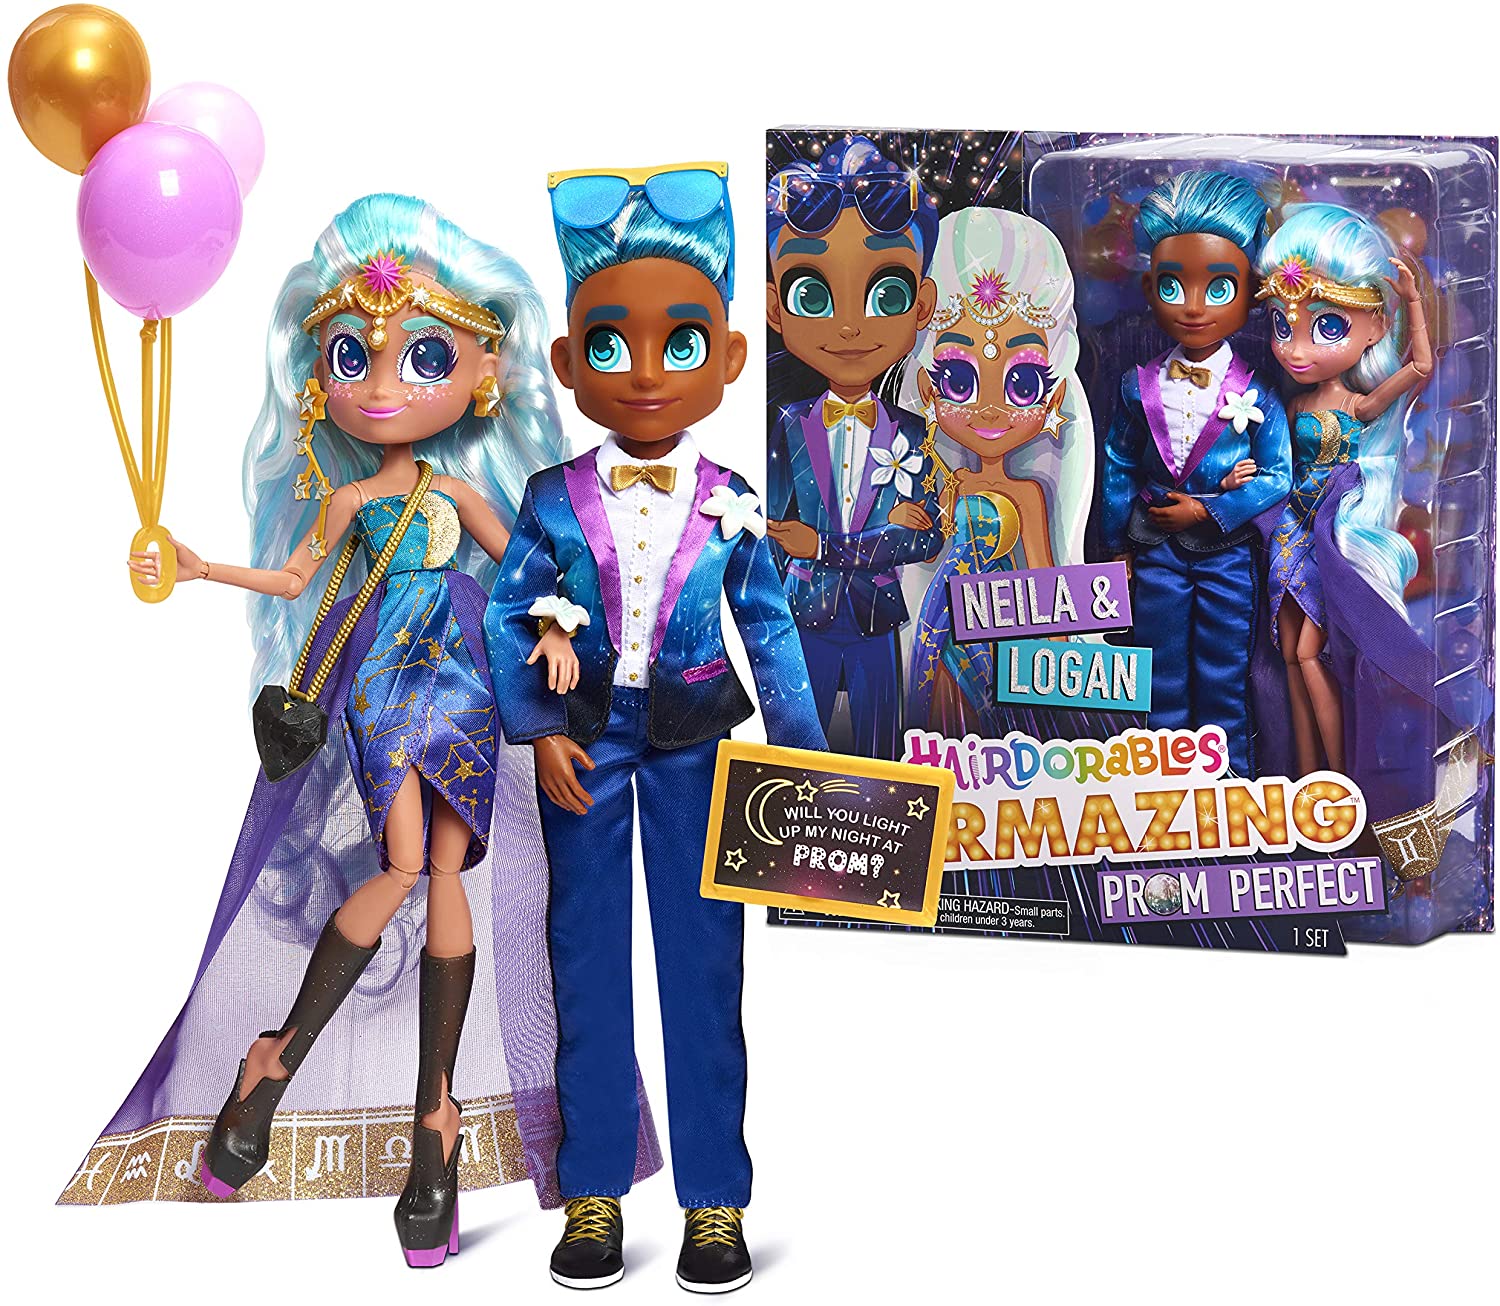 2-Pack Hairdorables Hairmazing Prom Doll Playset w/ 6 Surprises (Neila & Logan) $16.61 + FS w/ Amazon Prime or FS on $25+